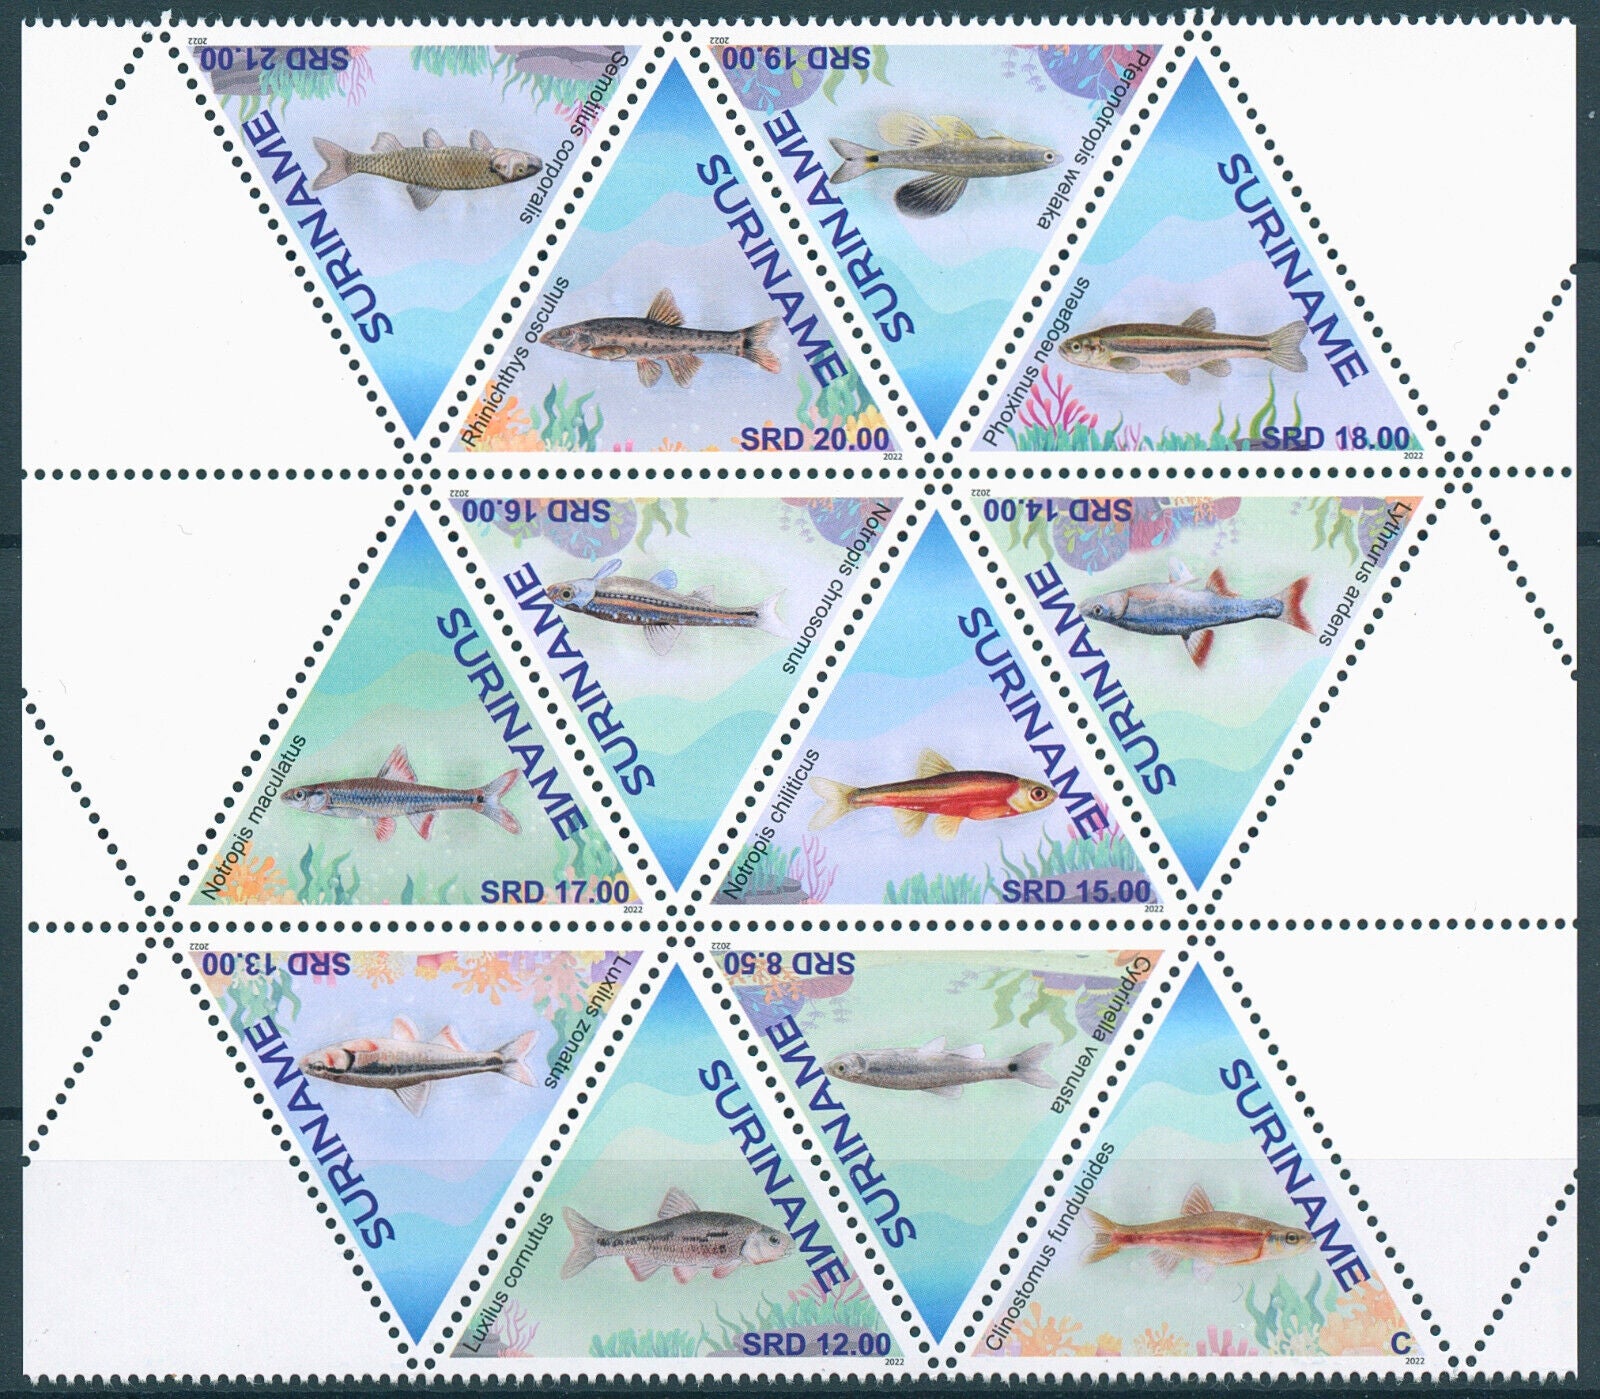 Suriname 2022 MNH Fish Stamps Fishes Rosyside Dace 12v Block